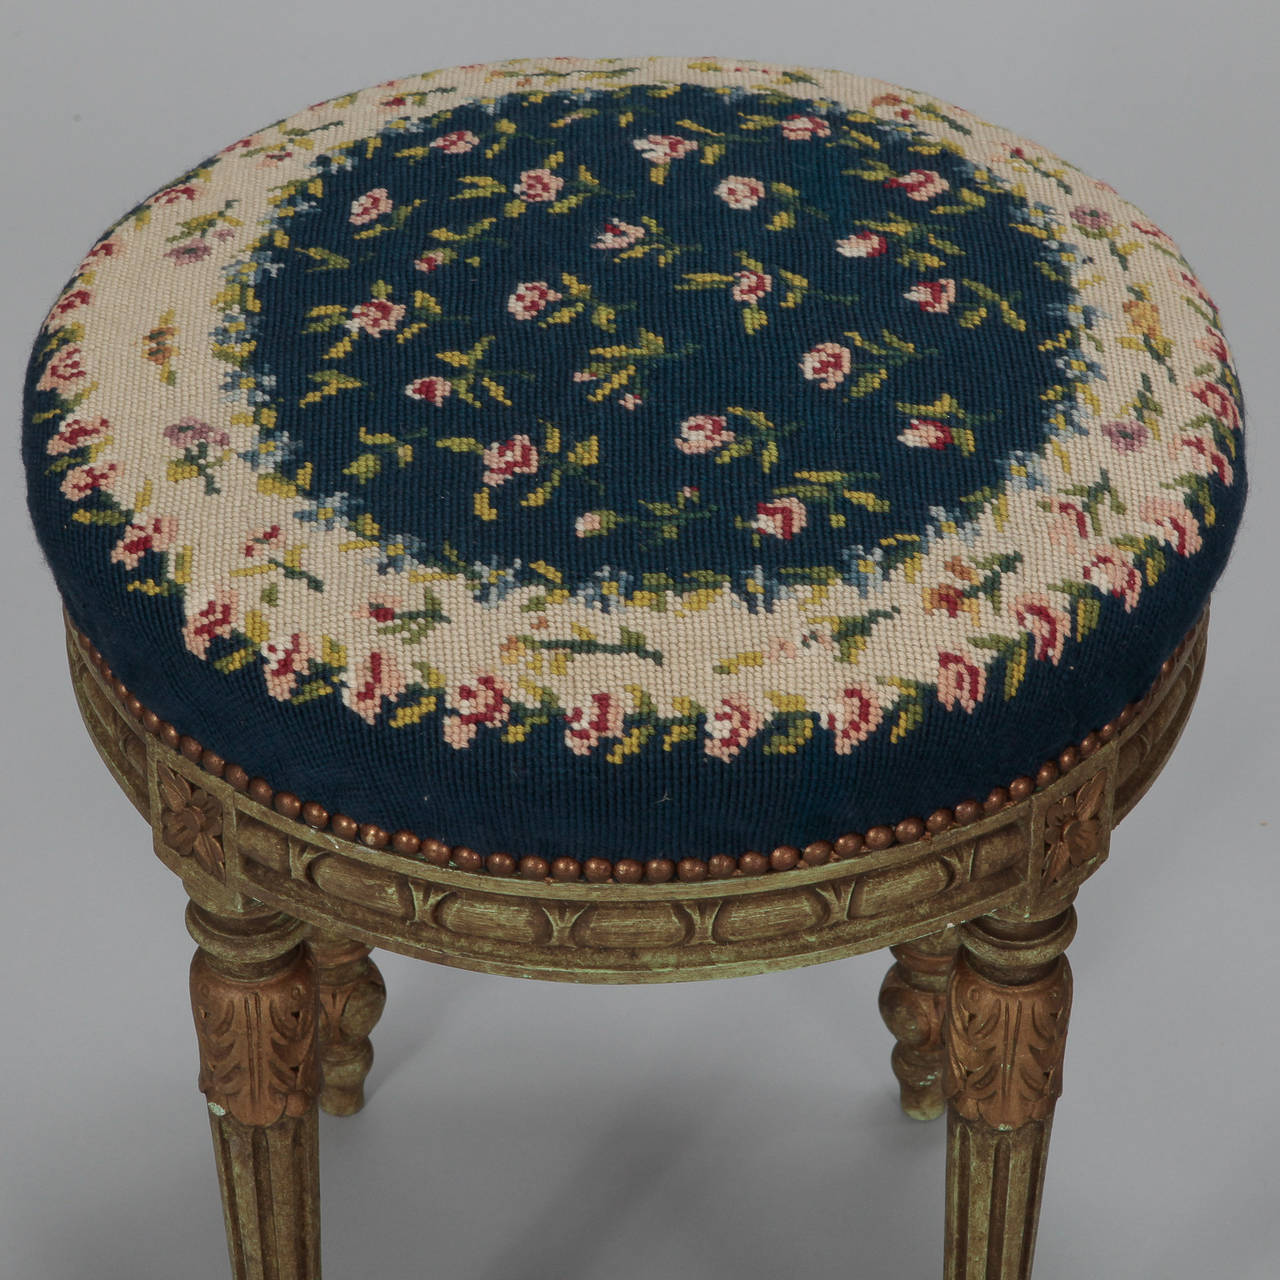 Early 20th Century Pair of French Round Stools with Blue Needlework Upholstery